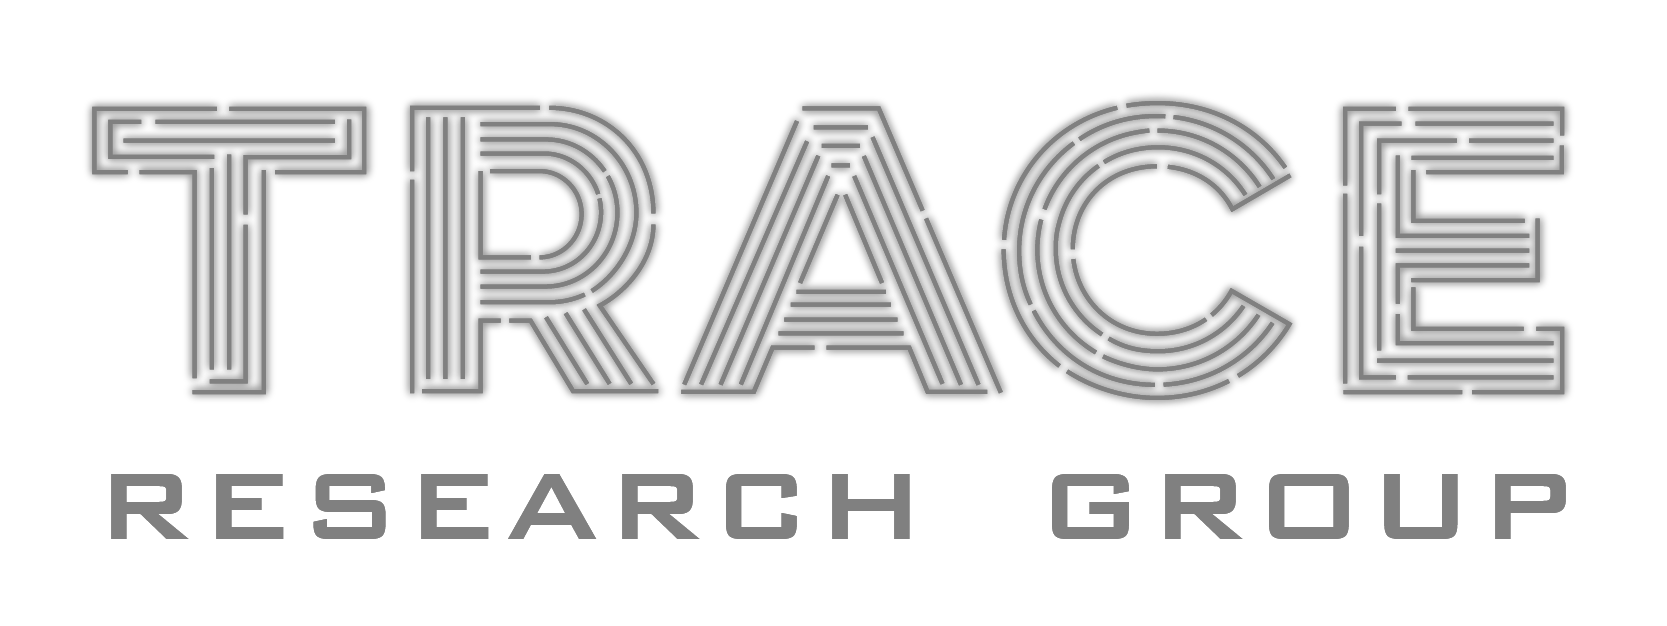 Trace Research Group